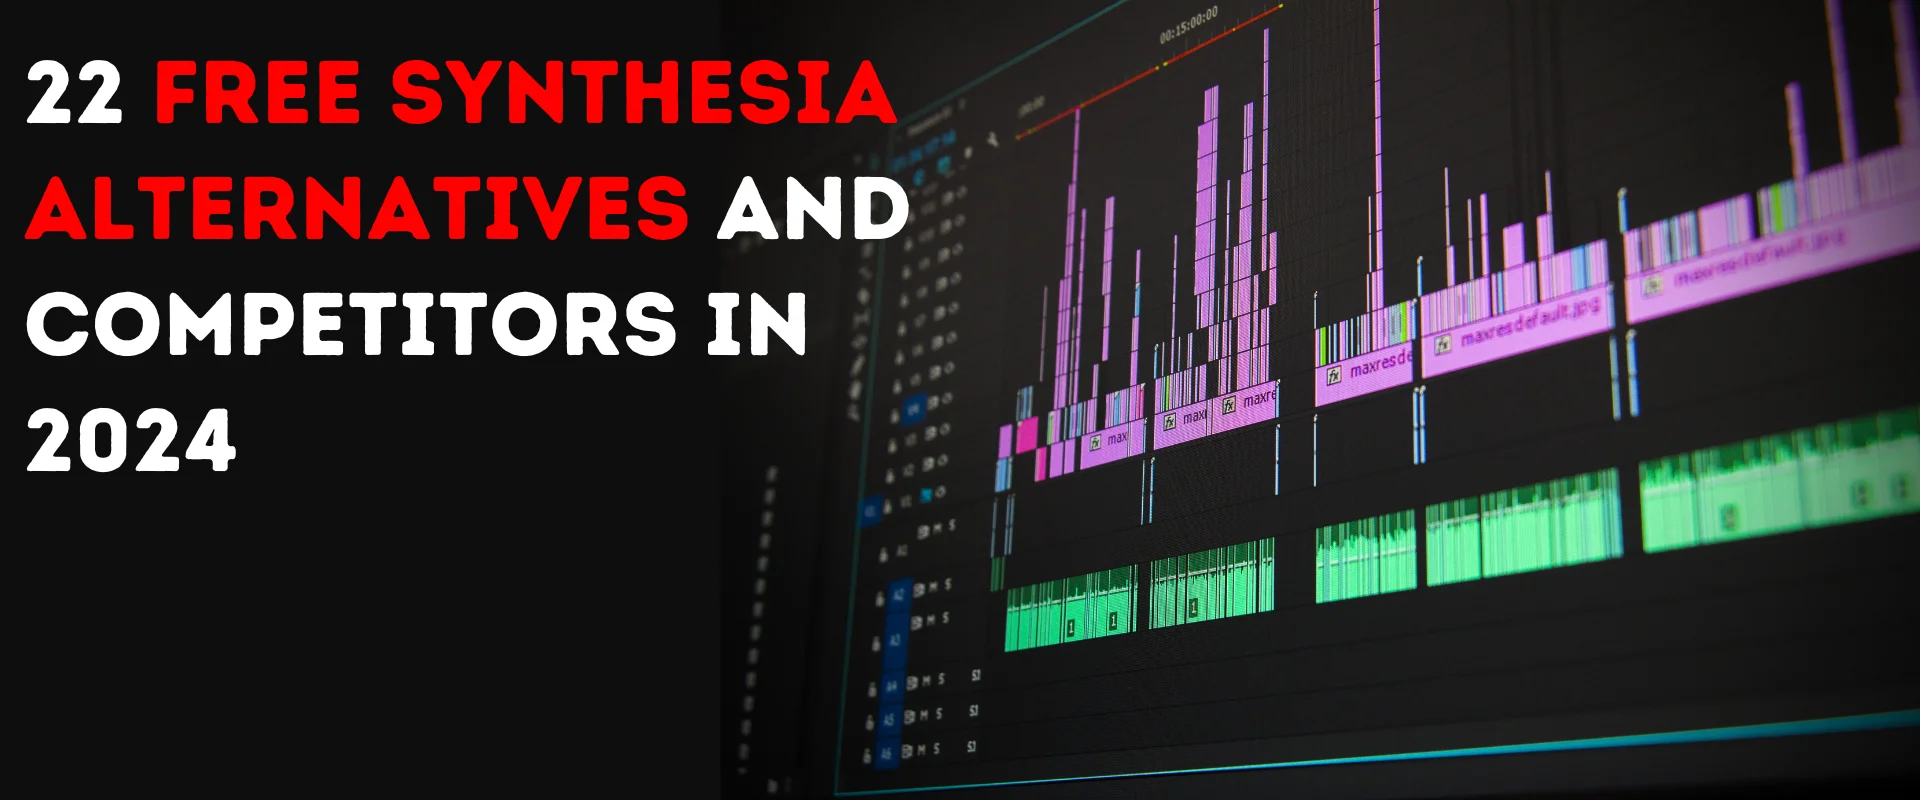 22 Best Free Synthesia Alternatives and Competitors in 2024